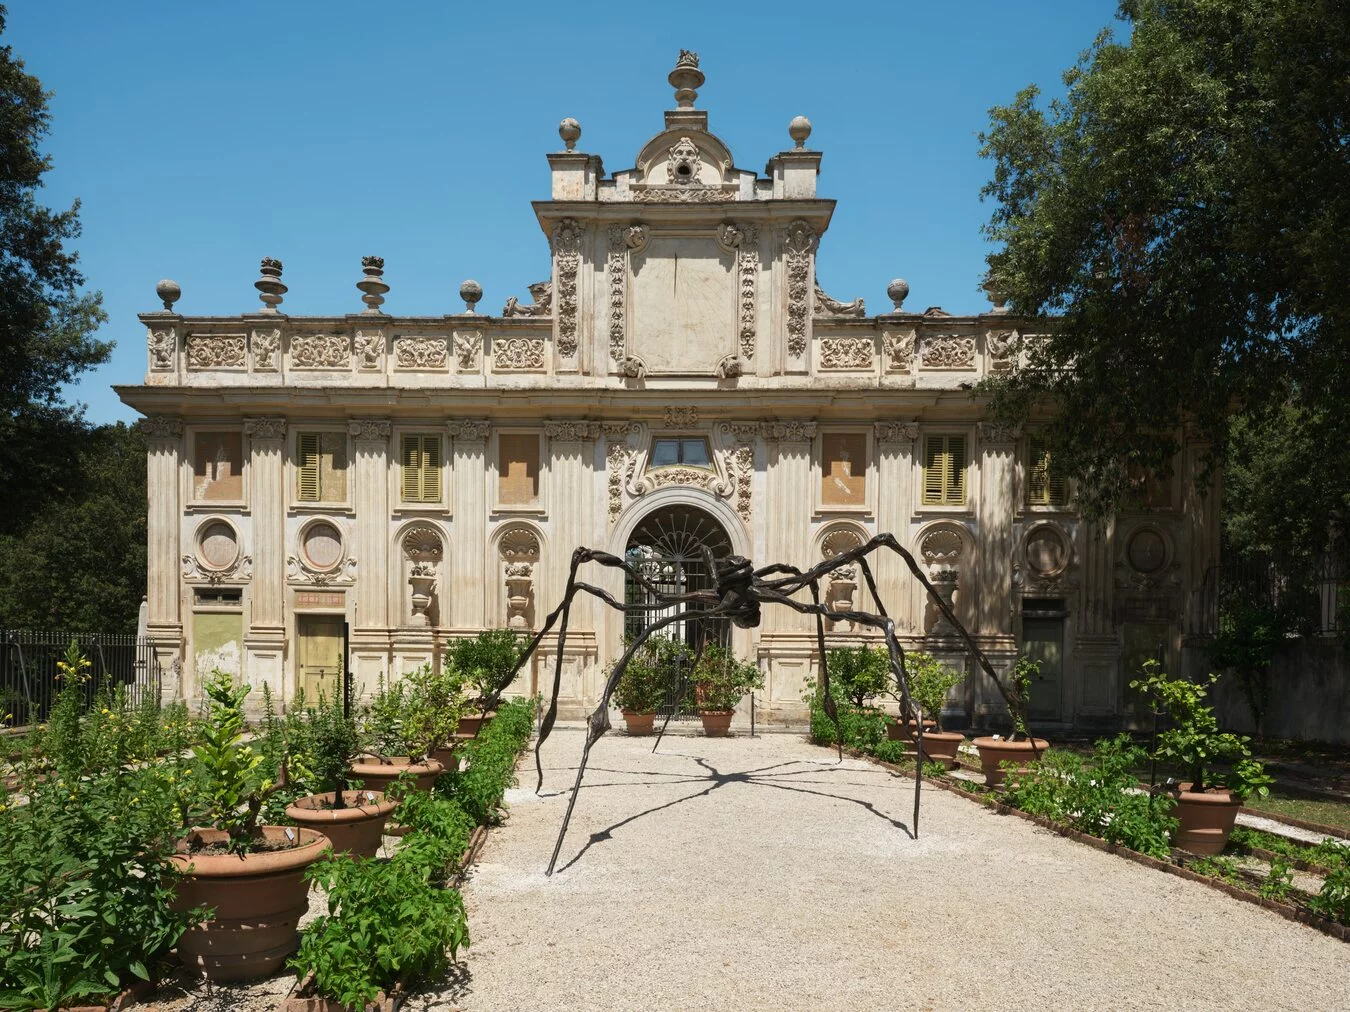 Spider, Louise Bourgeois, Galleria Borghese